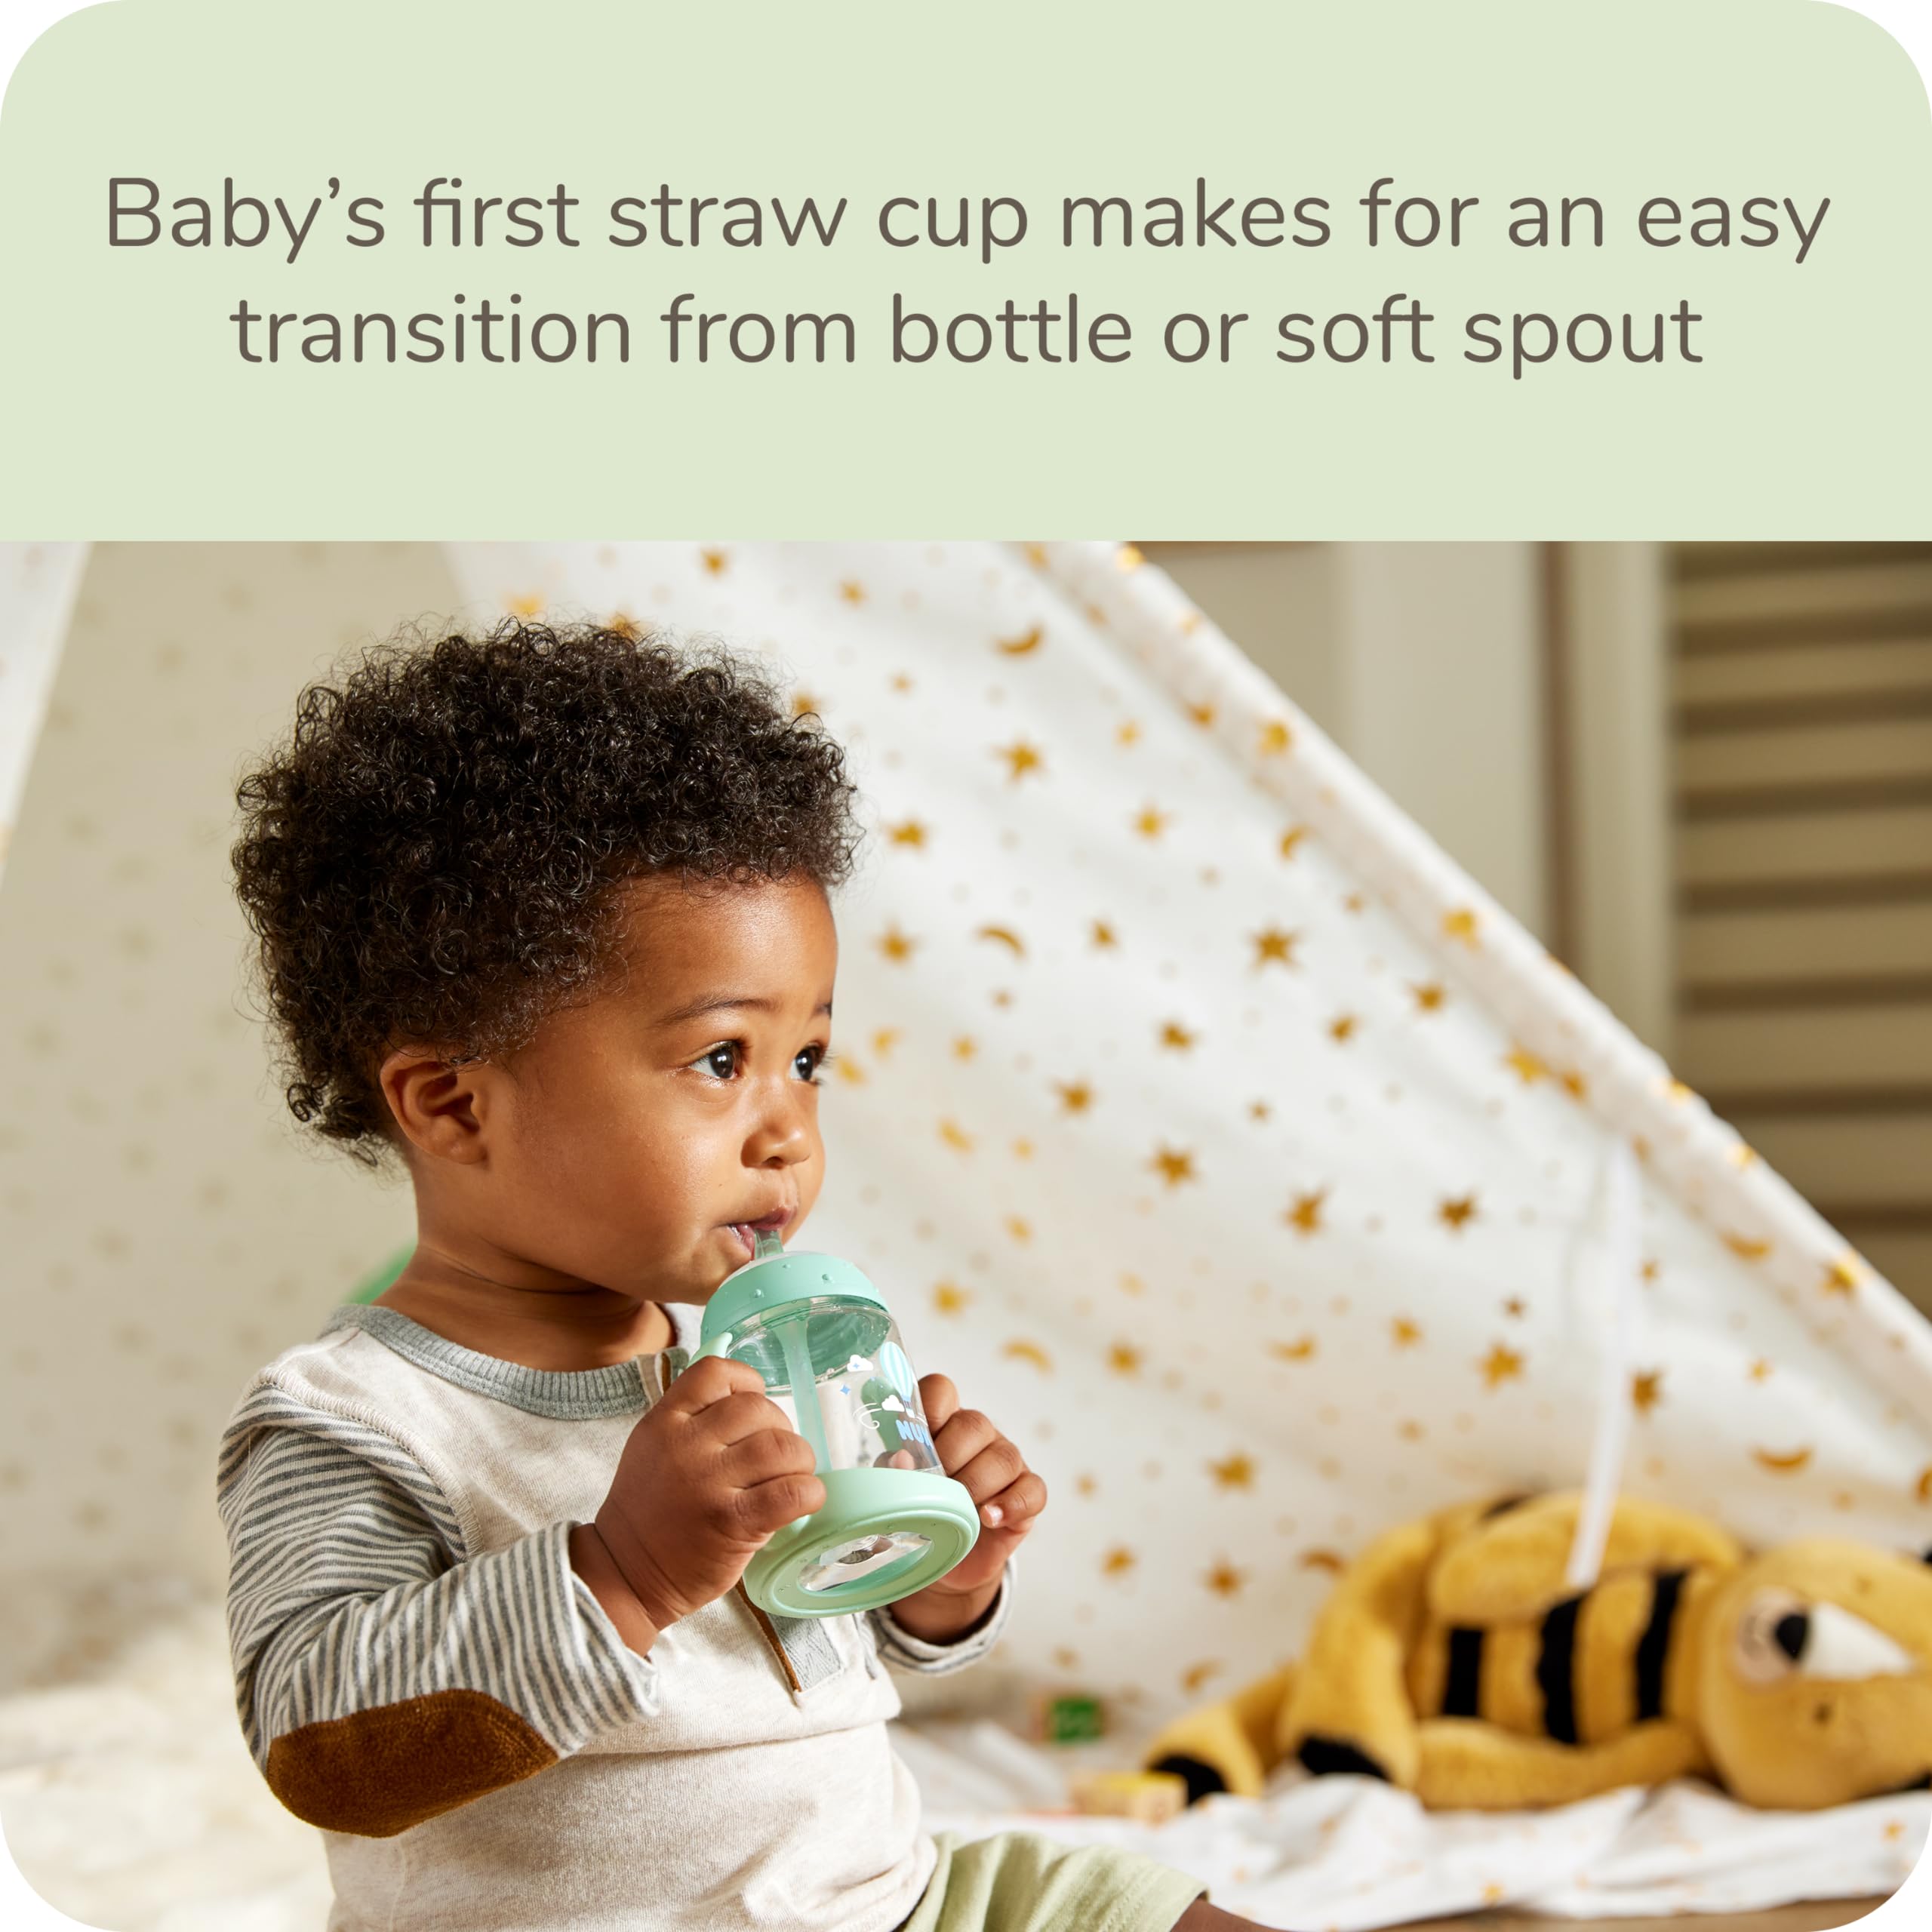 NUK Learner Straw Cup, 5 oz - Toddler Cup with Soft Straw for Easy Drinking, 6 Months and Up